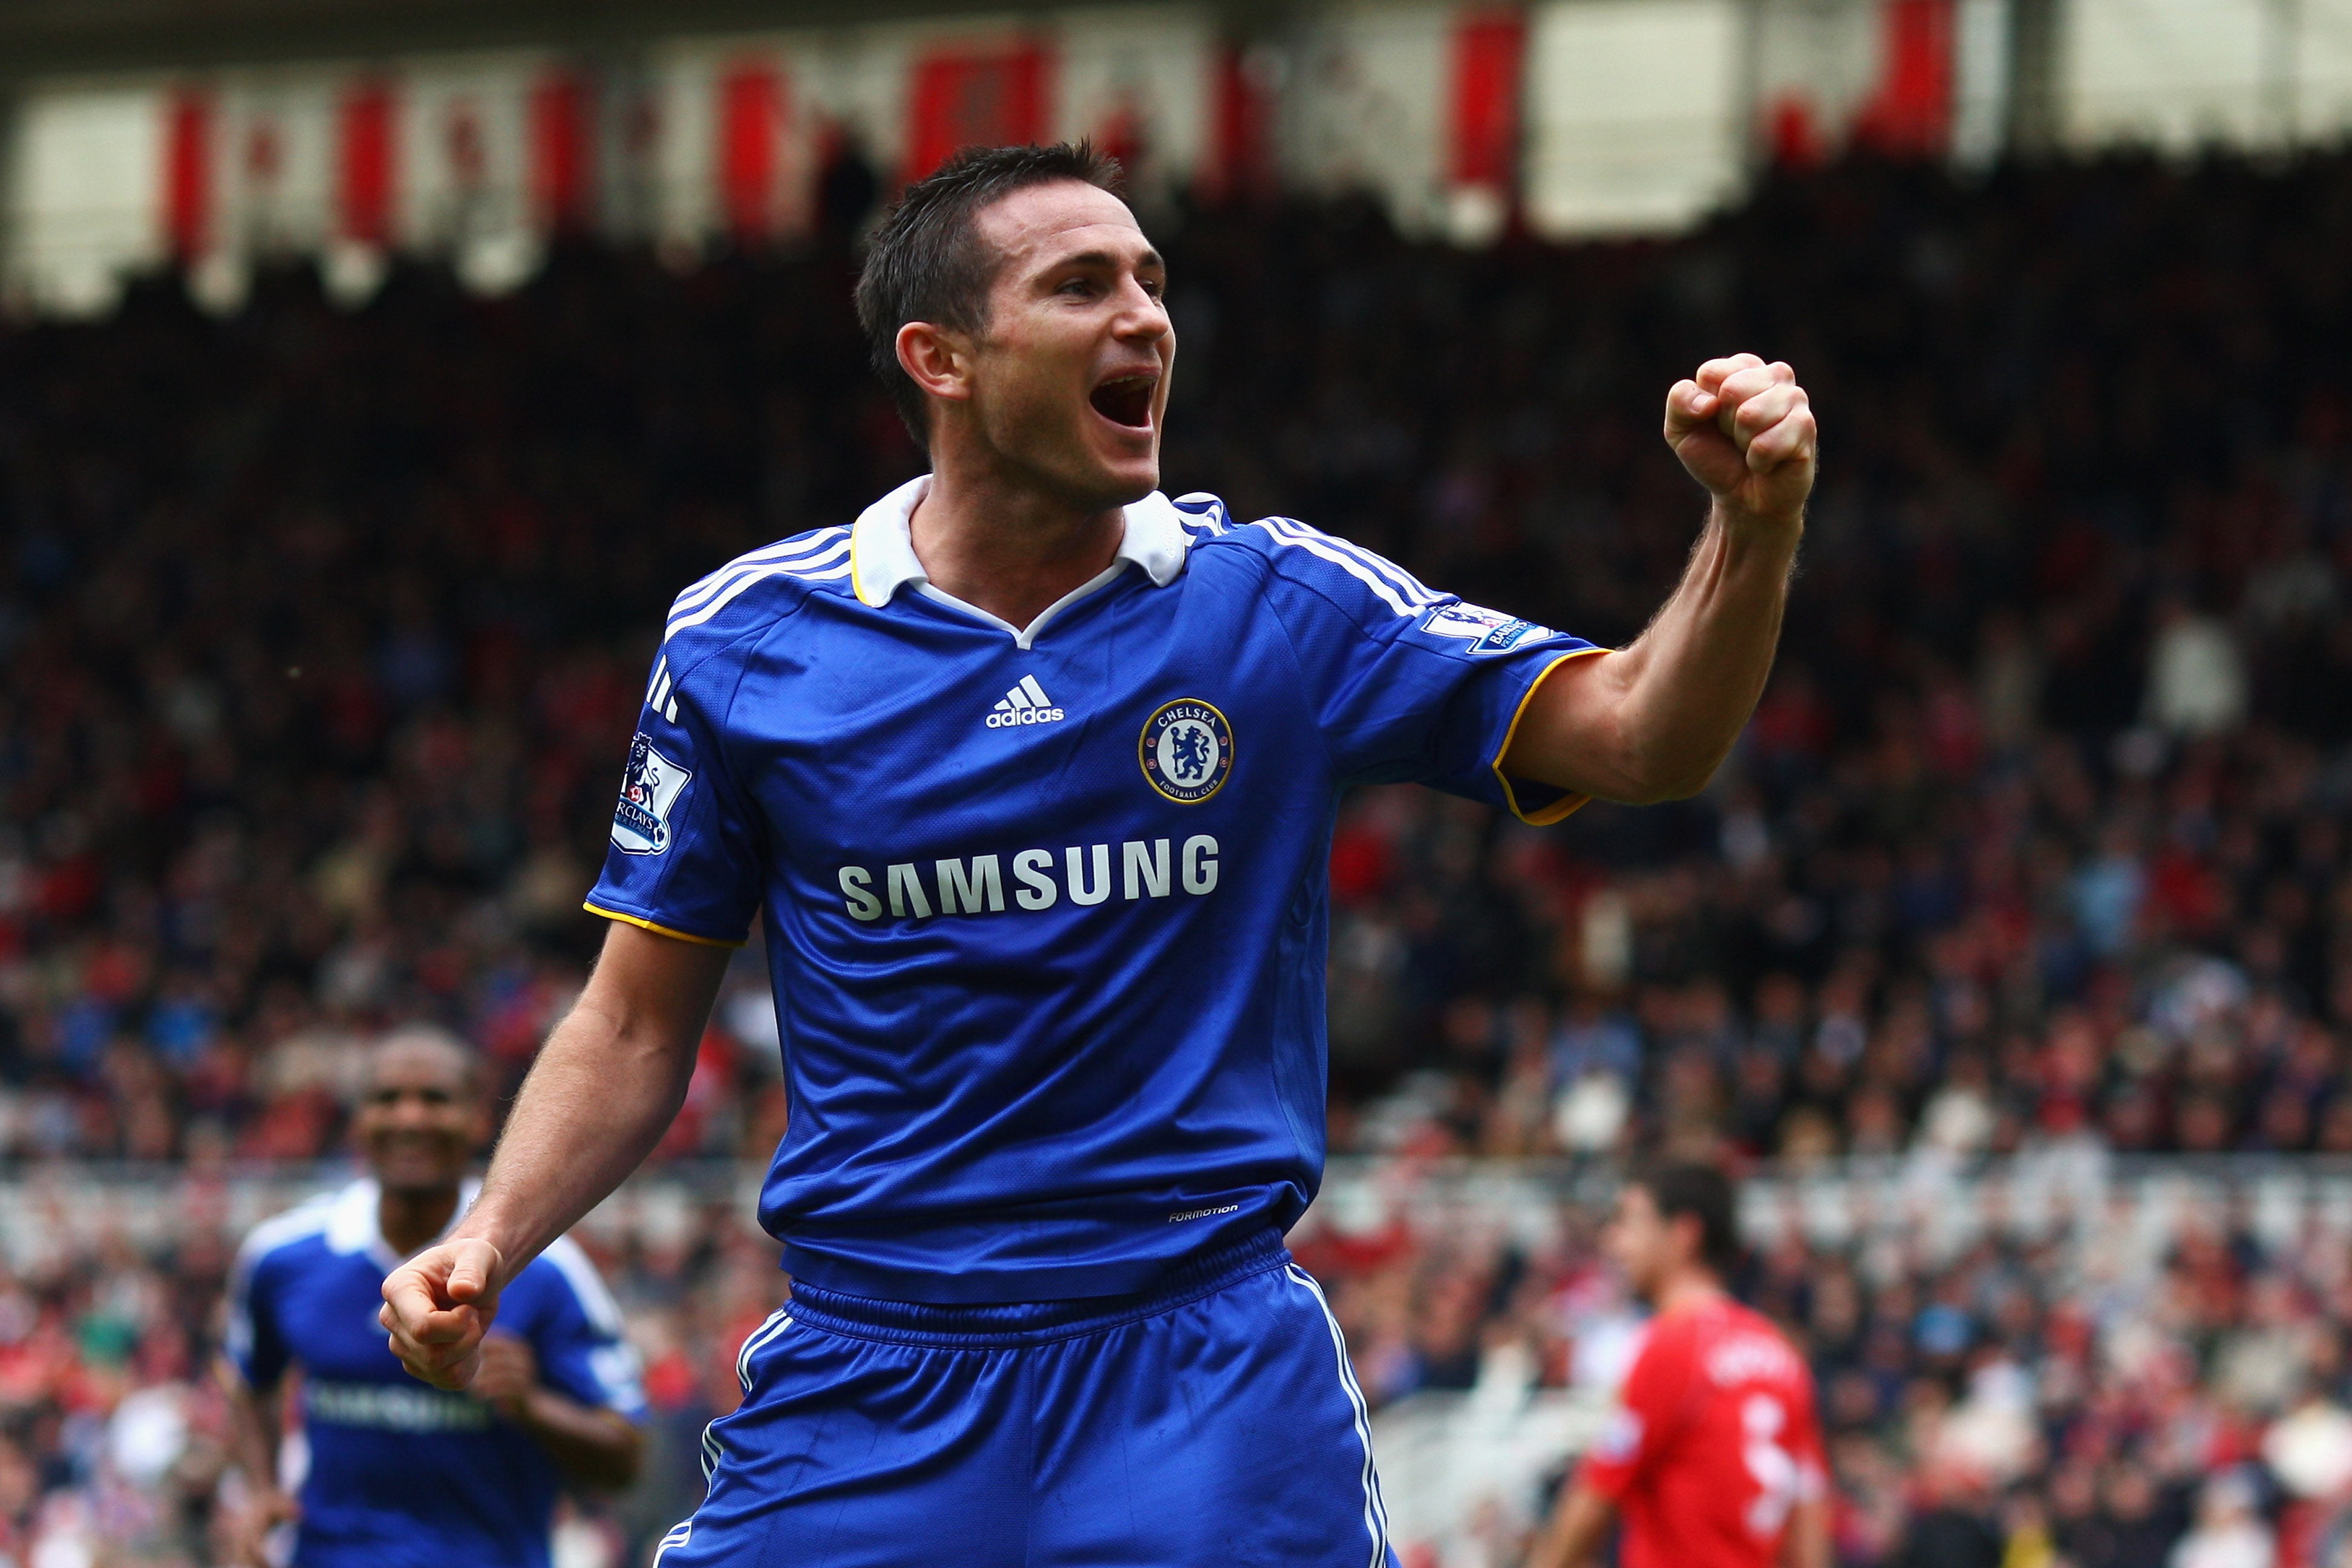 MIDDLESBROUGH, UNITED KINGDOM - OCTOBER 18:  Frank Lampard of Chelsea celebrates scoring his teams fourth goal of the game during the Barclays Premier League match between Middlesbrough and Chelsea at the Riverside Stadium on October 18, 2008 in Middlesbr